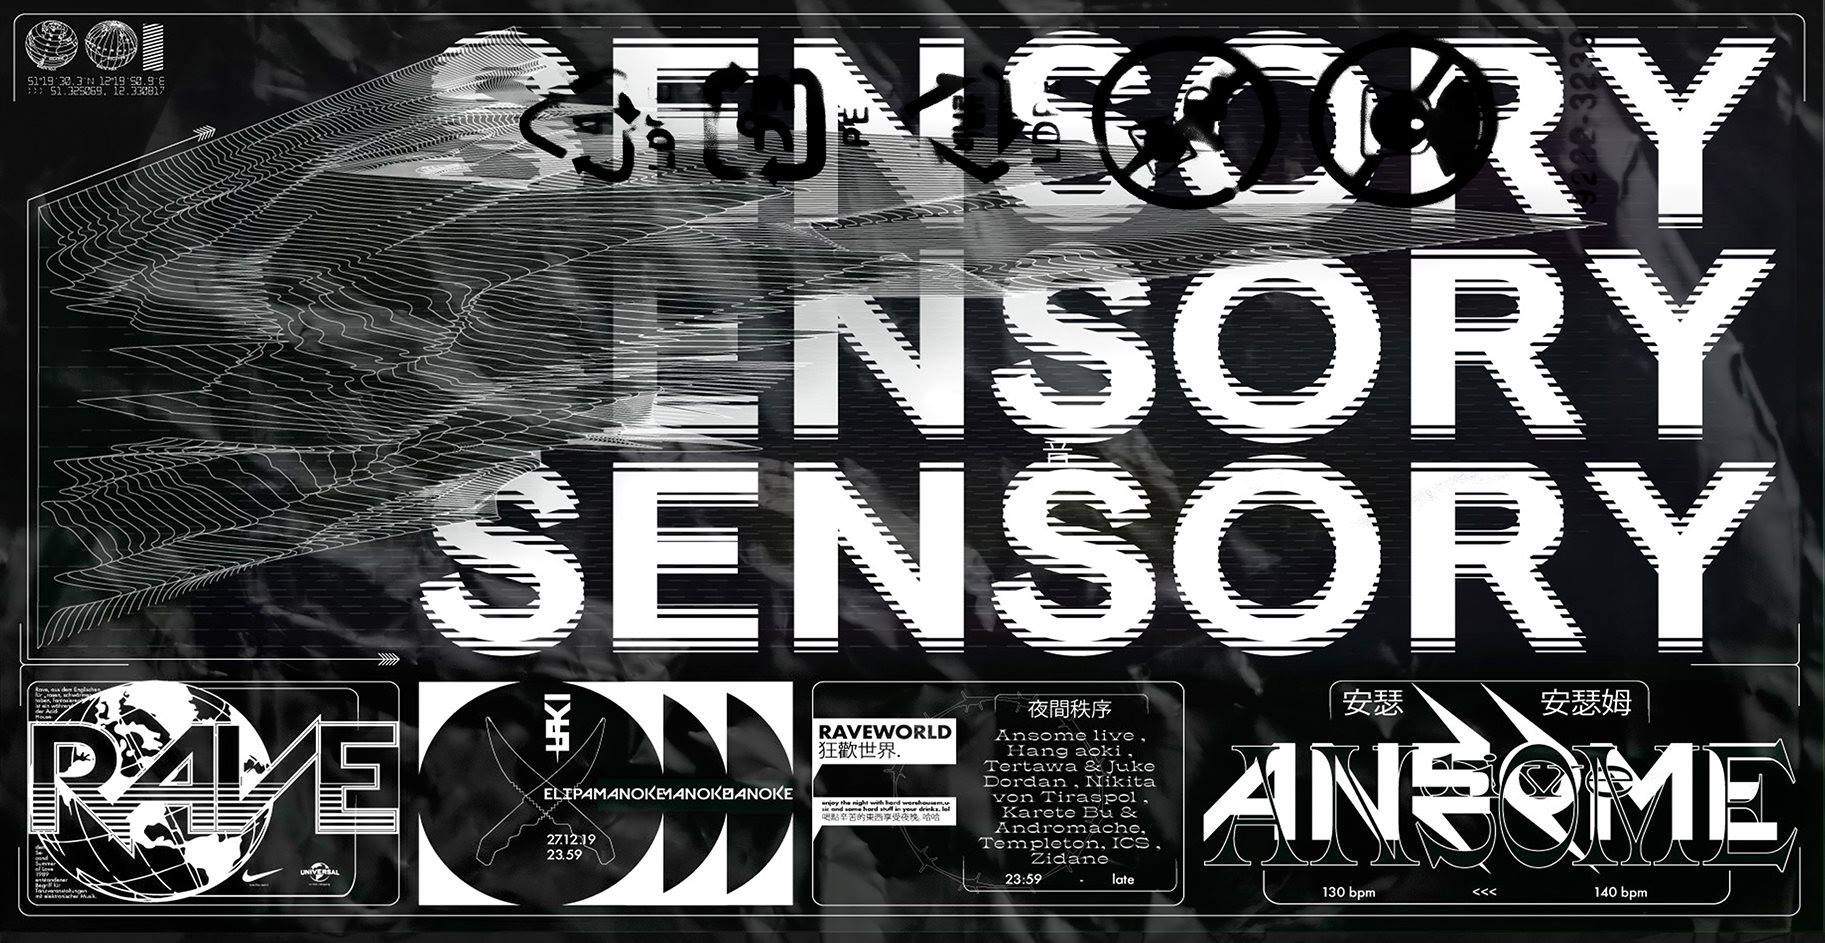 Sensory END Game 2019 with Ansome Live - Página frontal